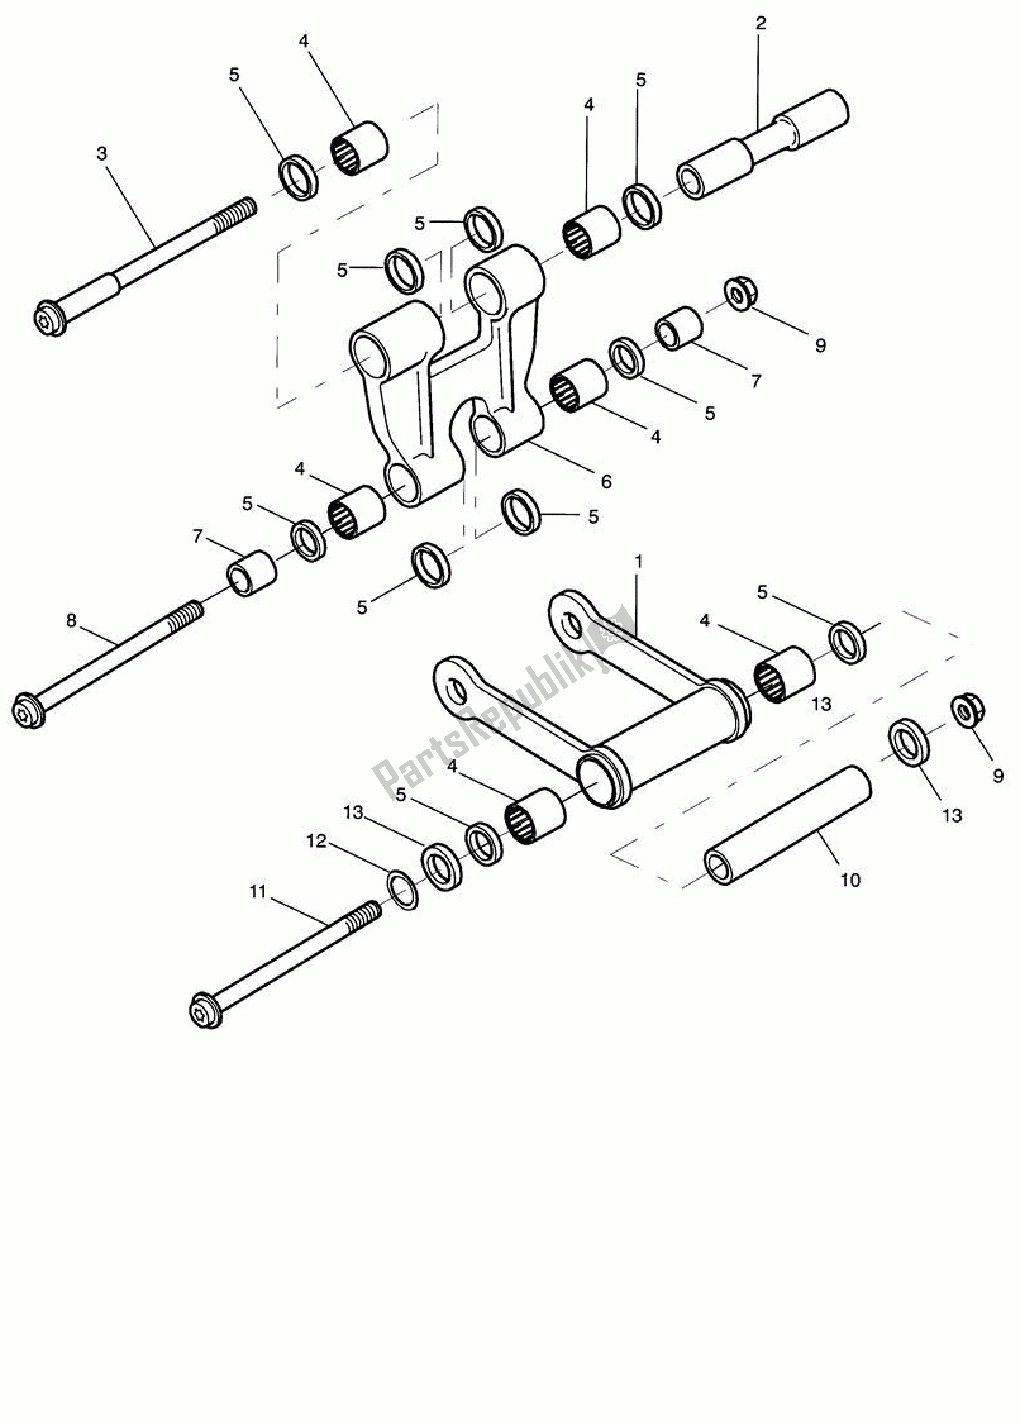 All parts for the Rear Suspension Linkage of the Triumph Speed Triple 1050 2008 - 2012